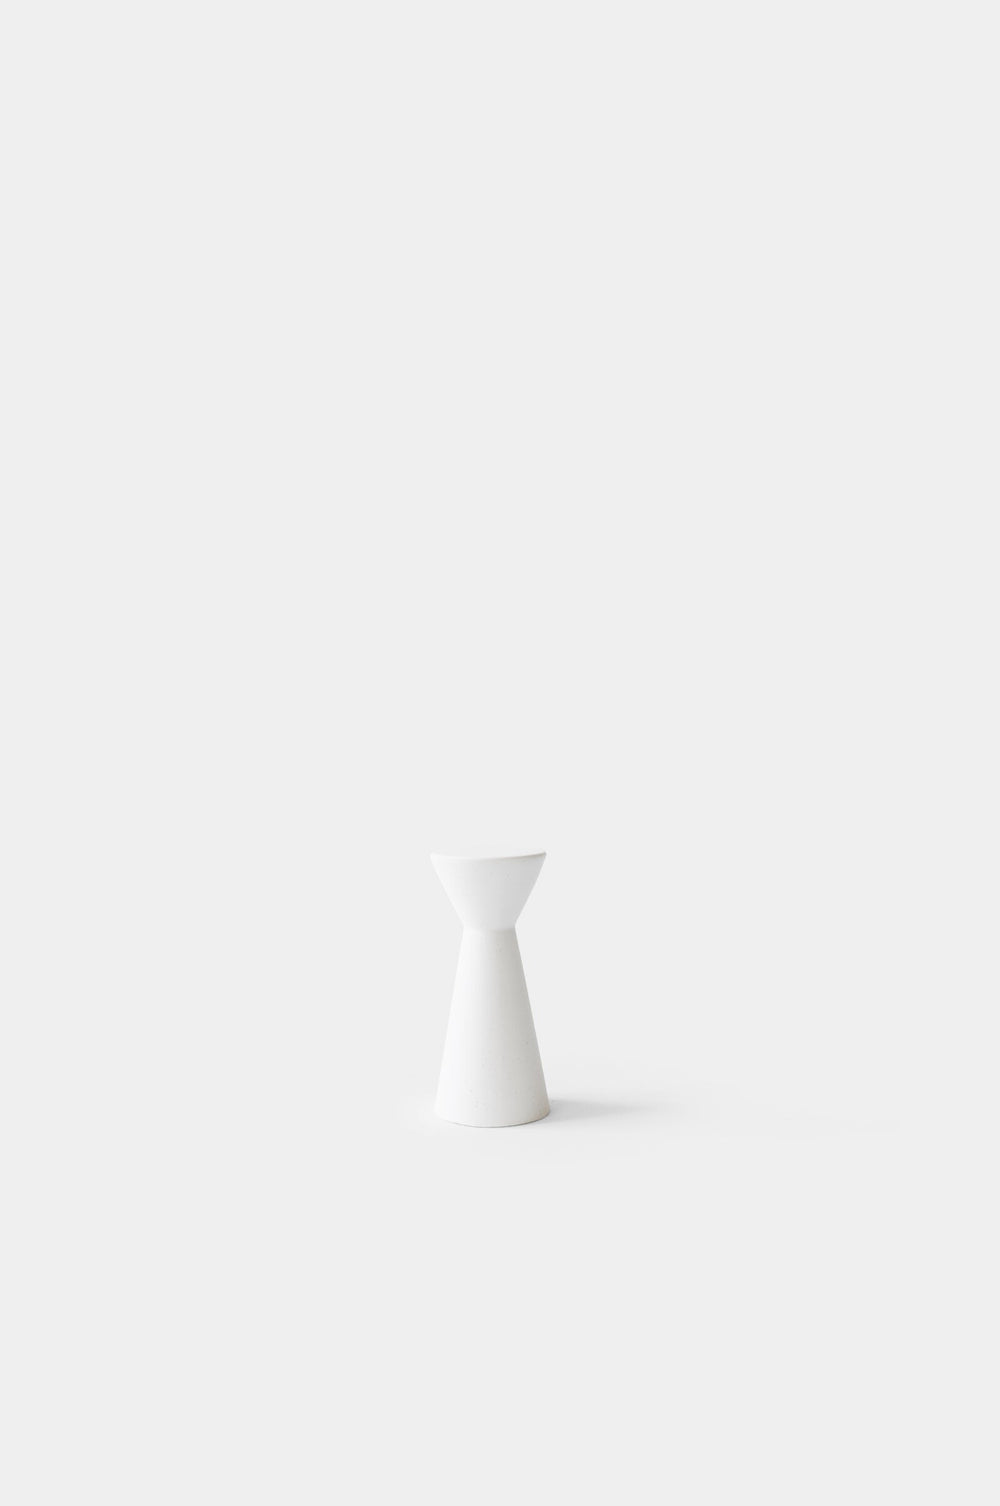 Chess piece - Queen Board Games House Raccoon Pearl White 